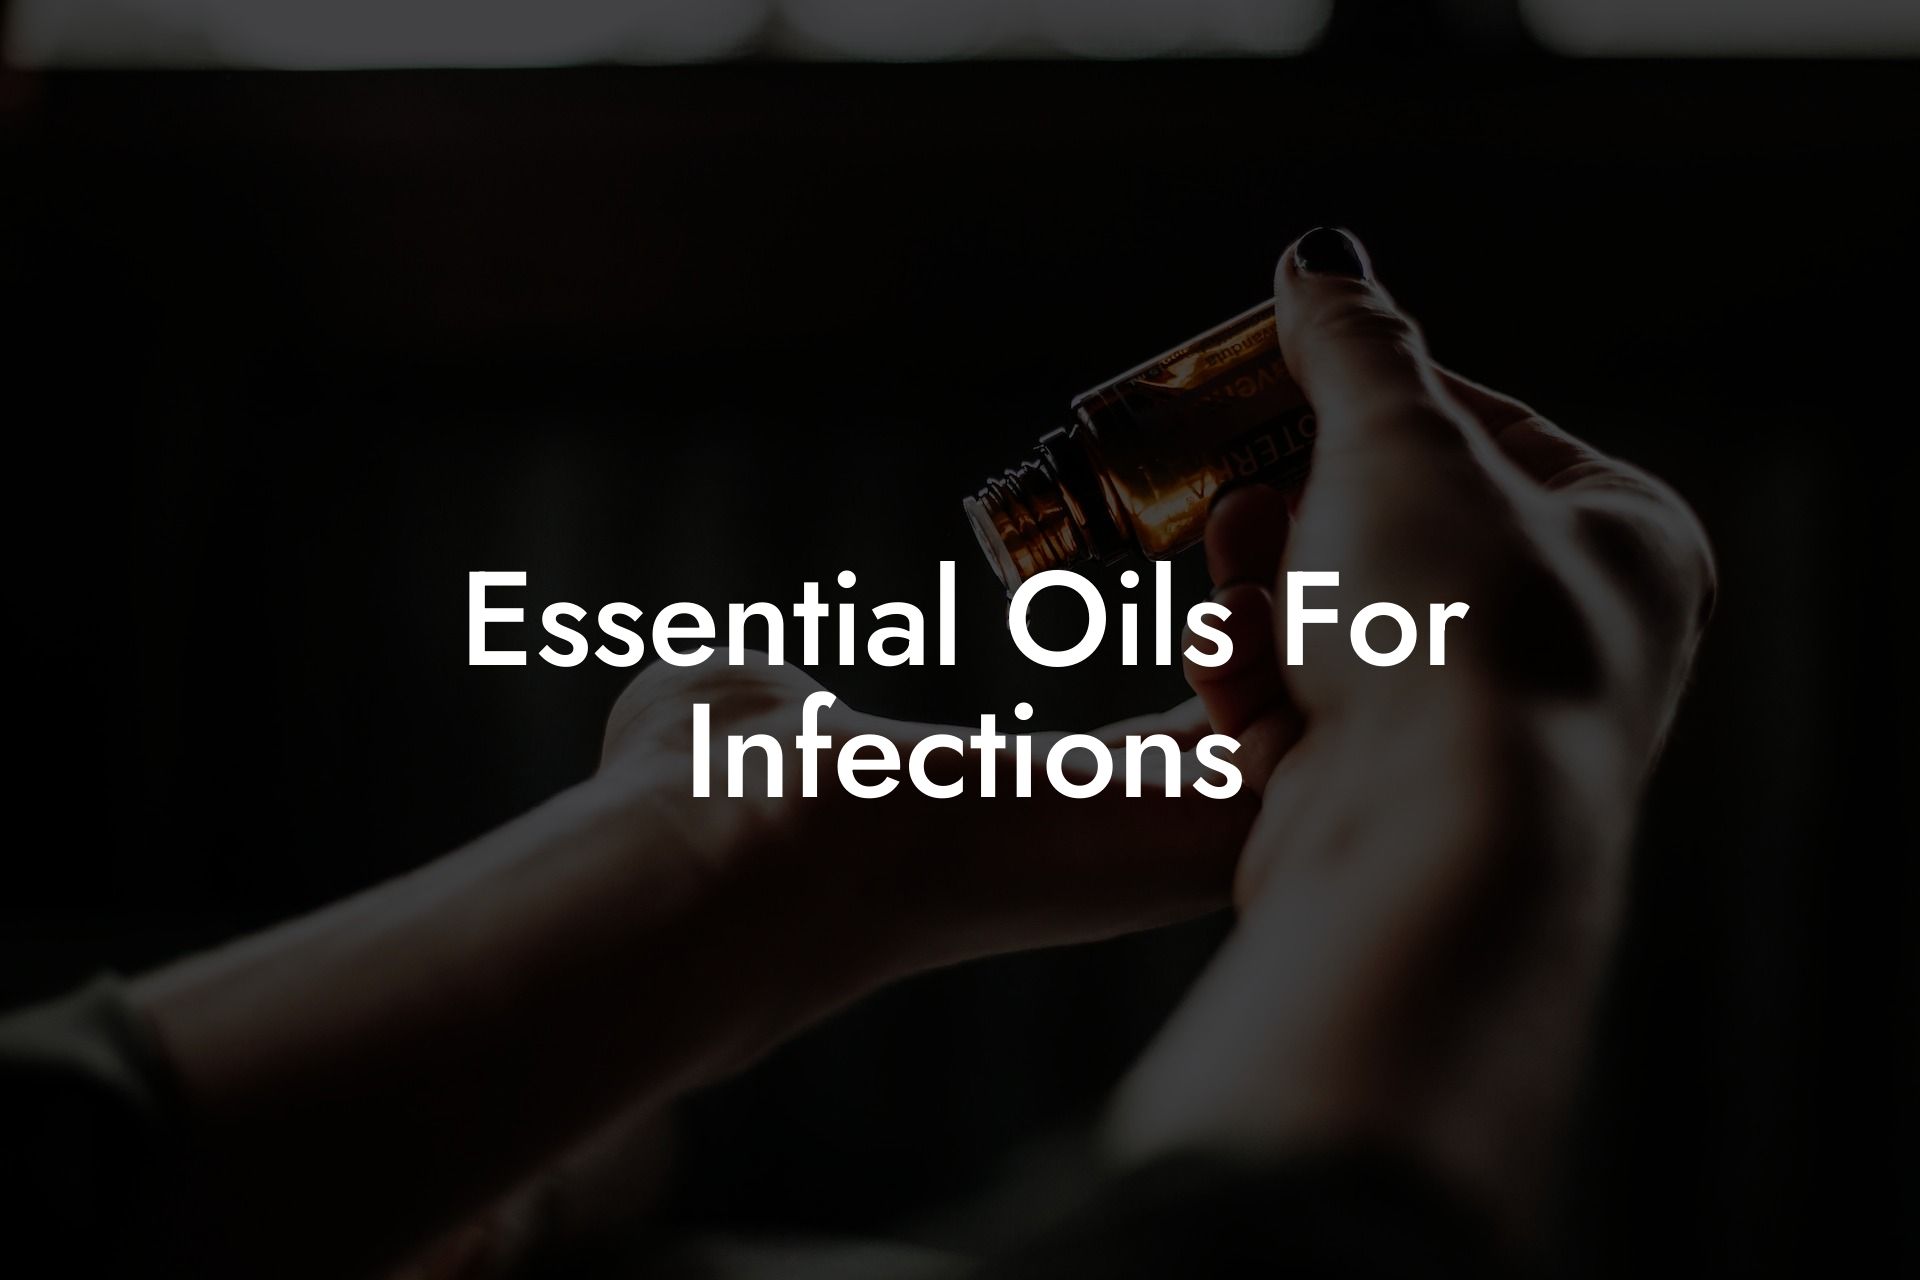 Essential Oils For Infections